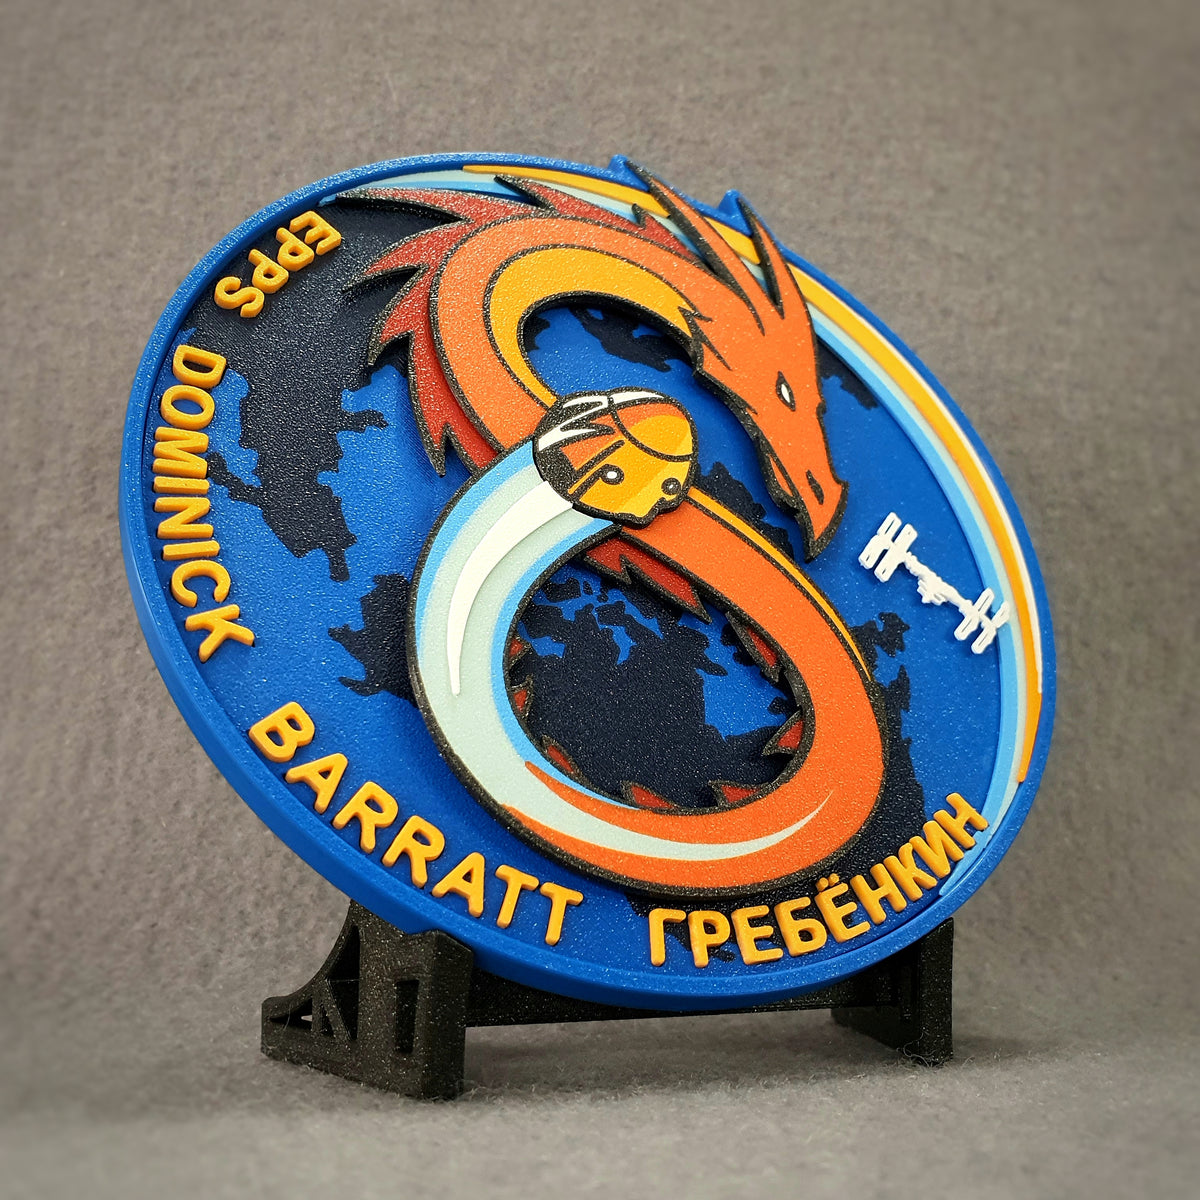 SpaceX - Crew 8 Patch